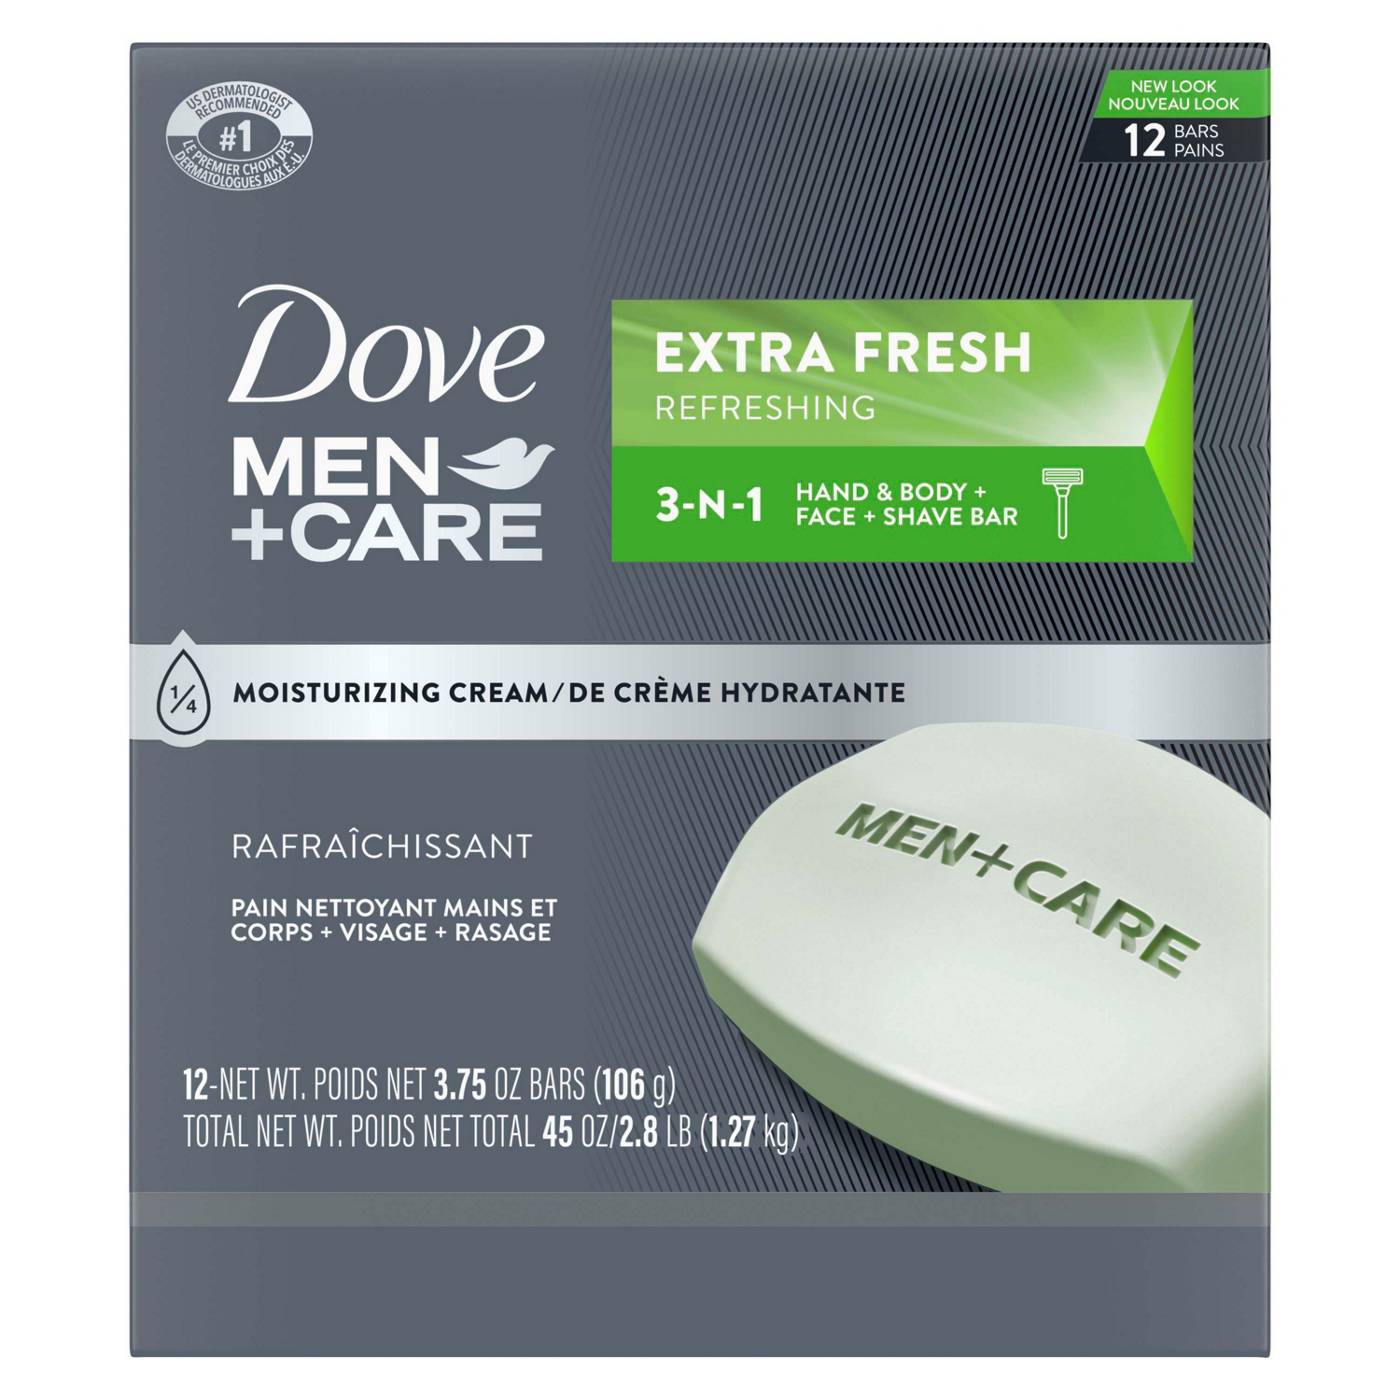 Dove Men+Care Bar 3 in 1 Cleanser for Body, Face, and Shaving Extra Fresh; image 2 of 2